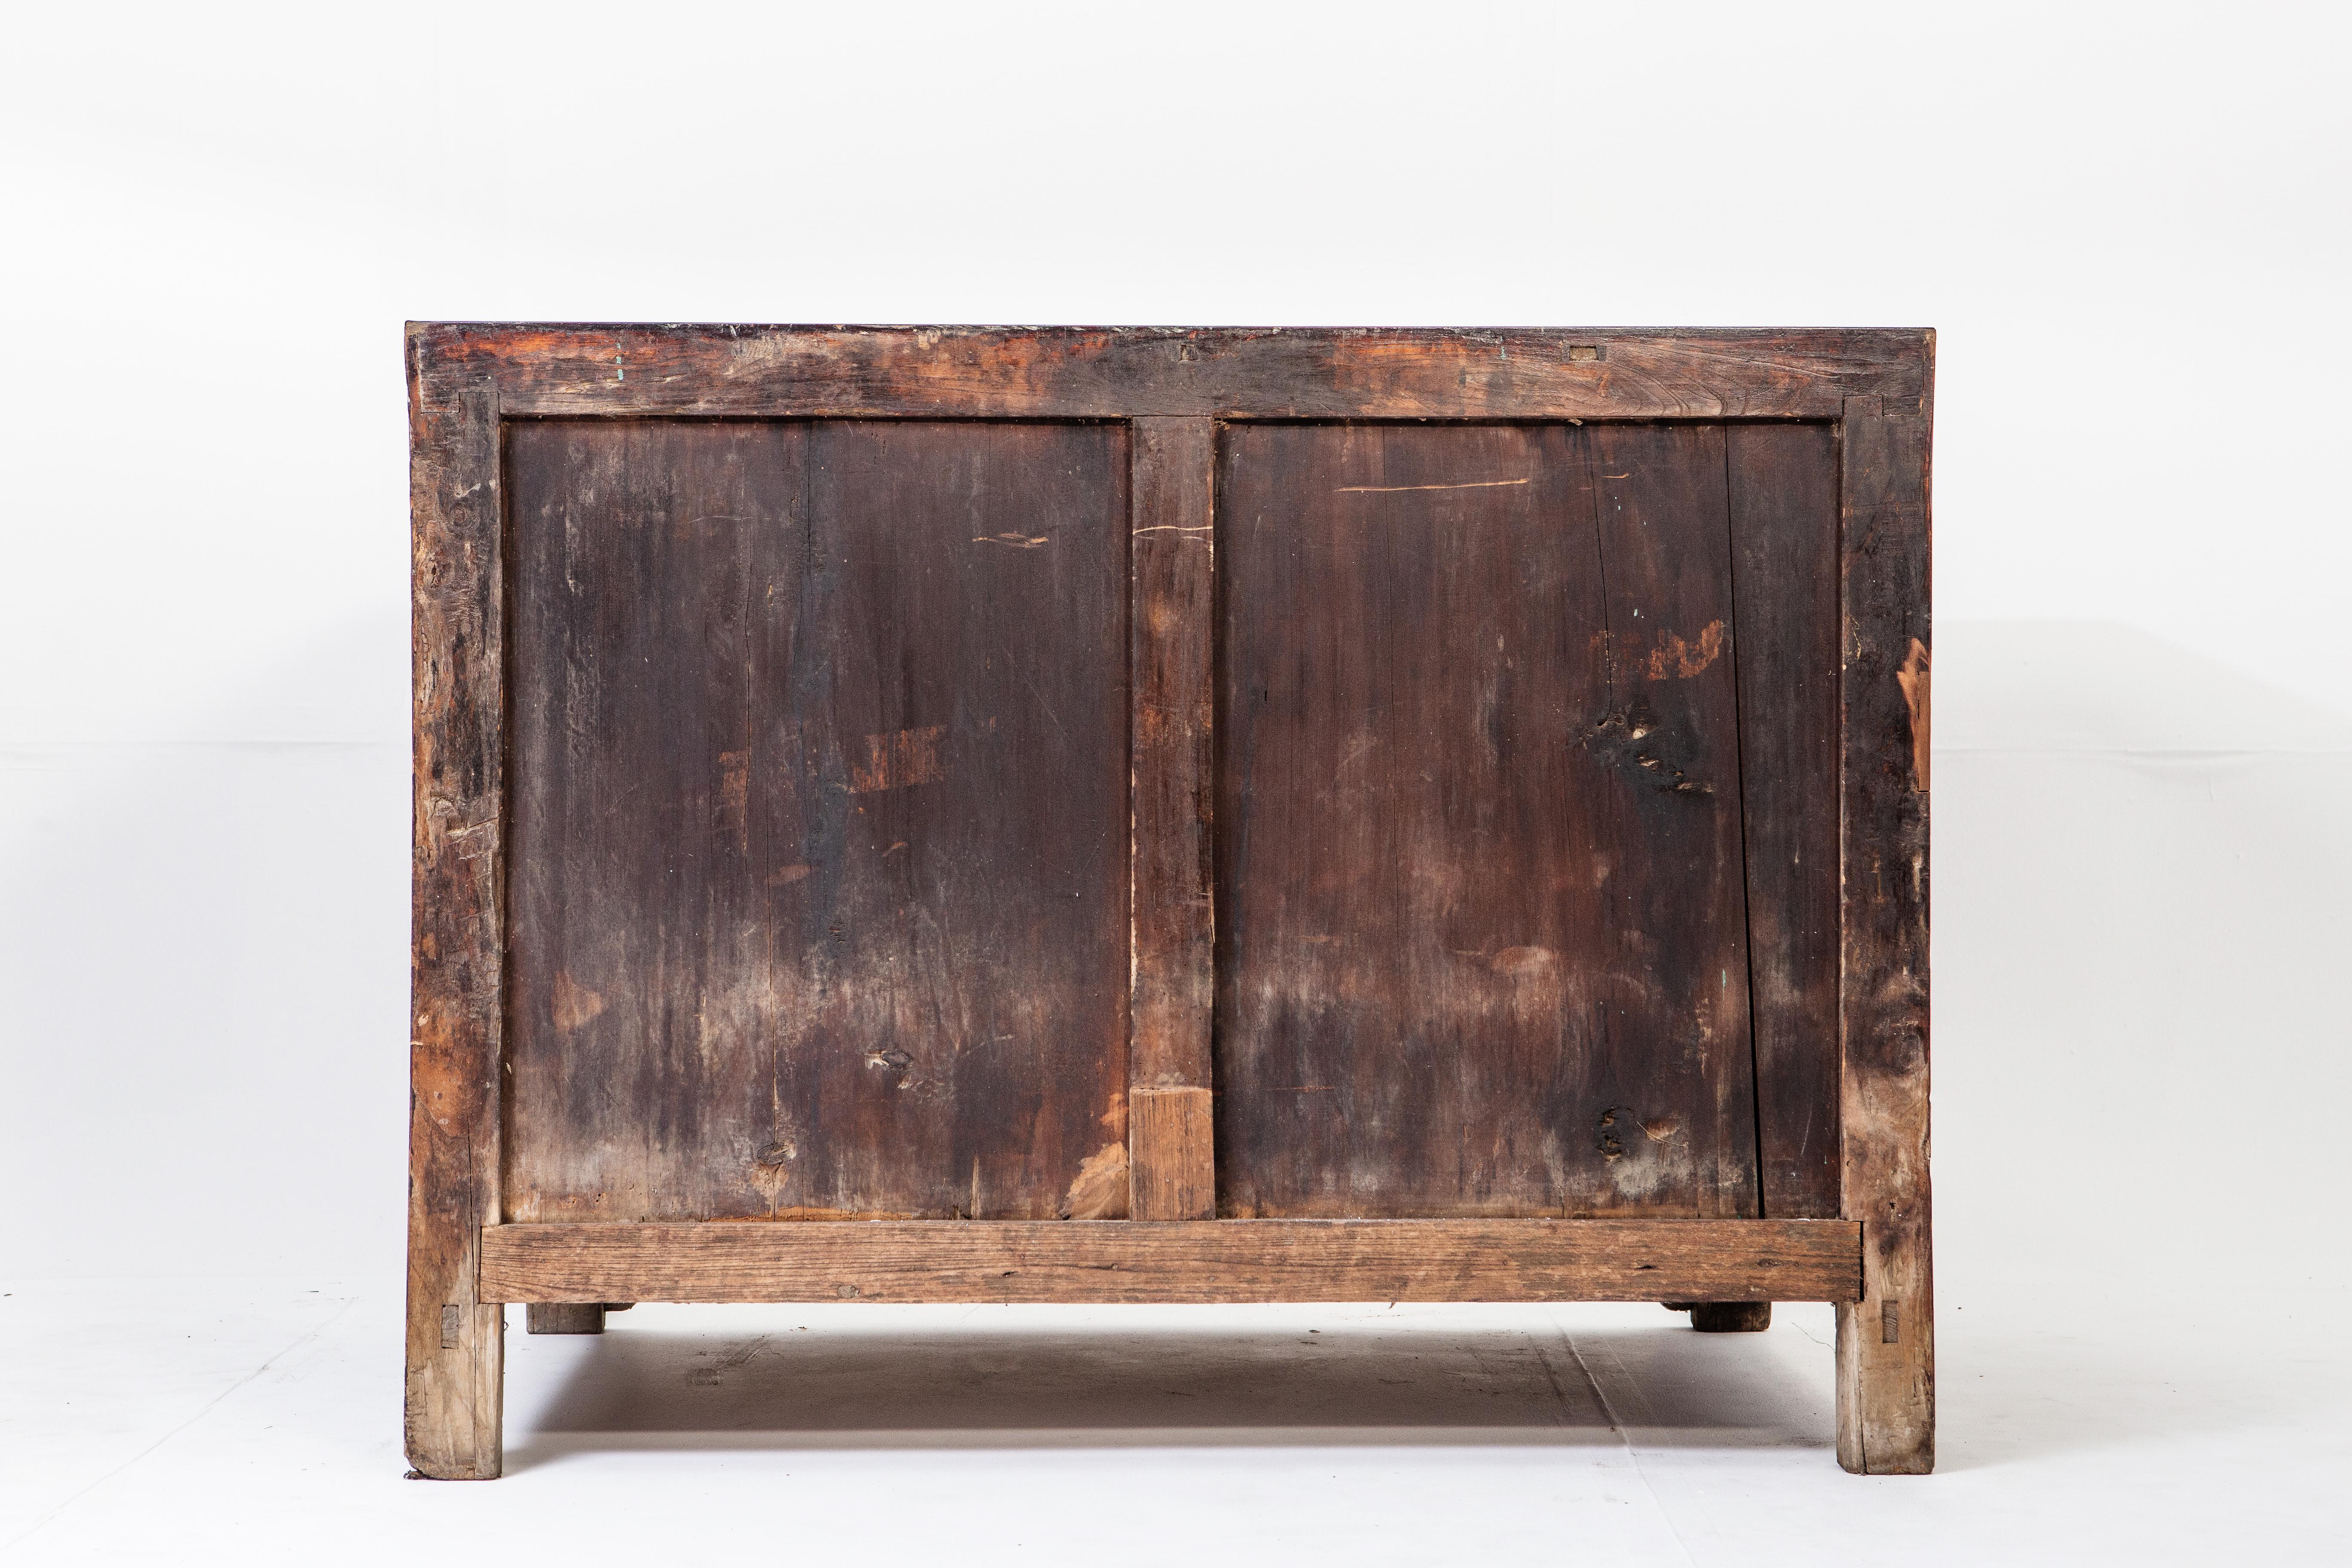 This handsome storage chest is from Tianjin, China and made from elmwood and dates to the mid-1900s (during the time of Mao Zedong). The piece features three drawers, Dual opening doors, and a beautiful aged patina. Due to long use, the lacquer